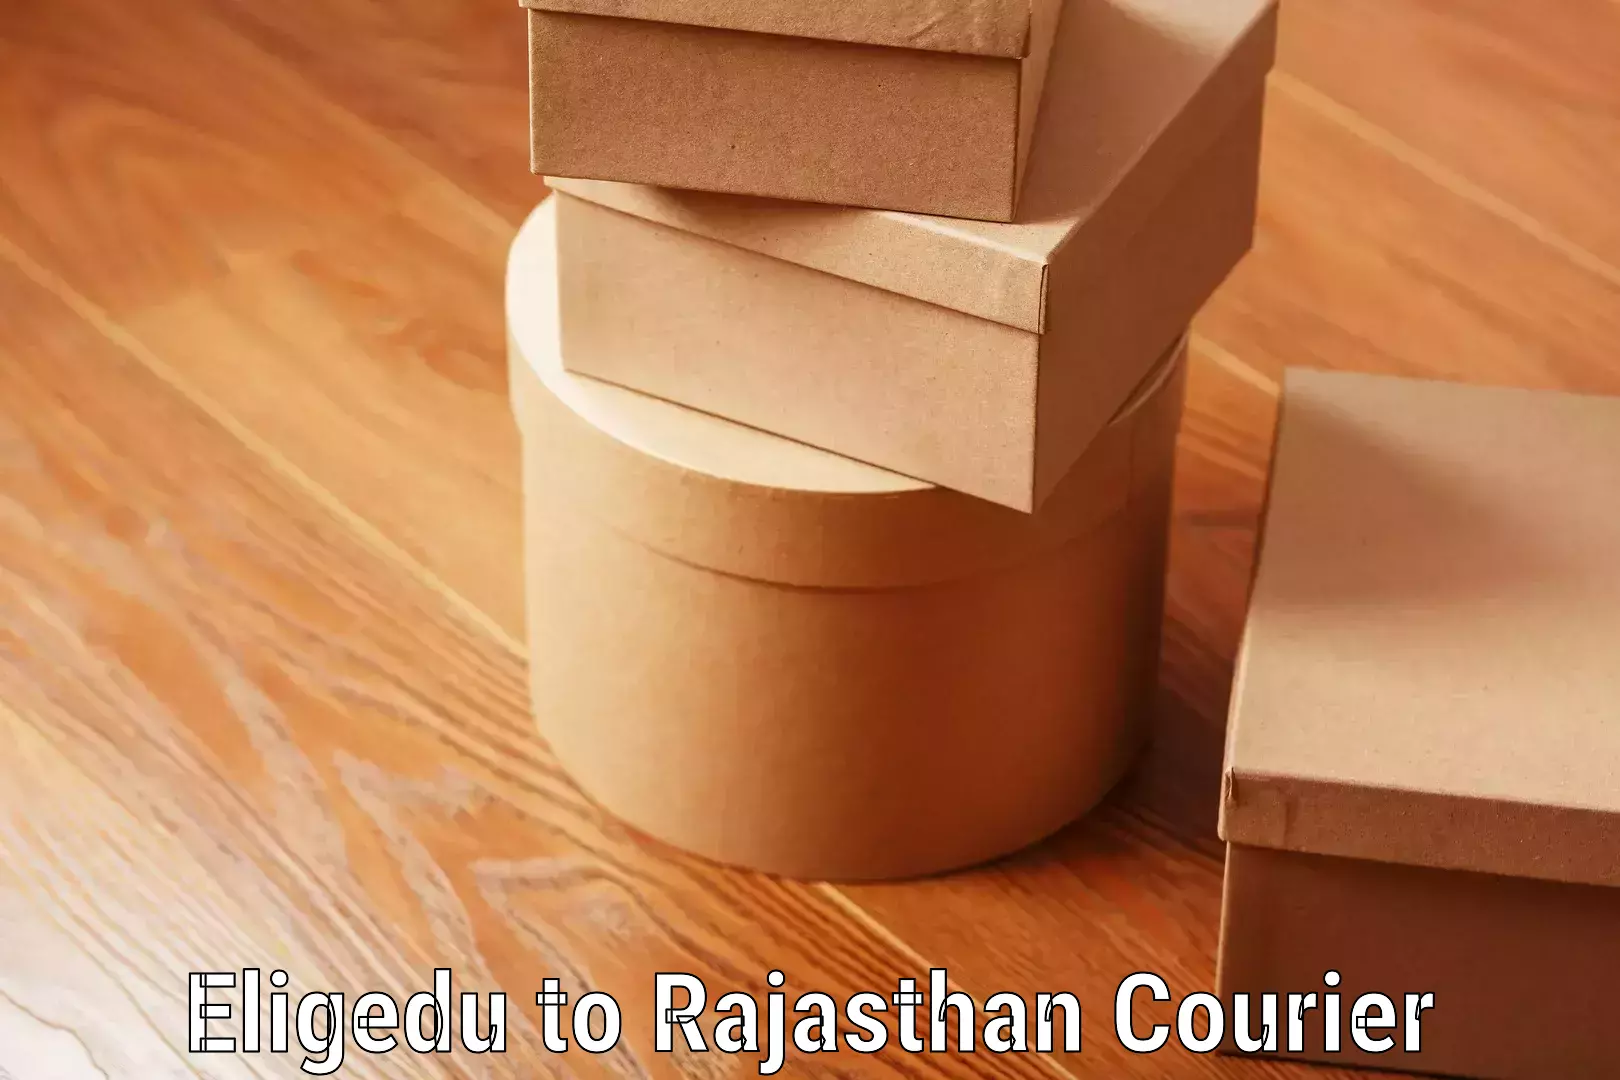 Doorstep luggage collection in Eligedu to Rajasthan